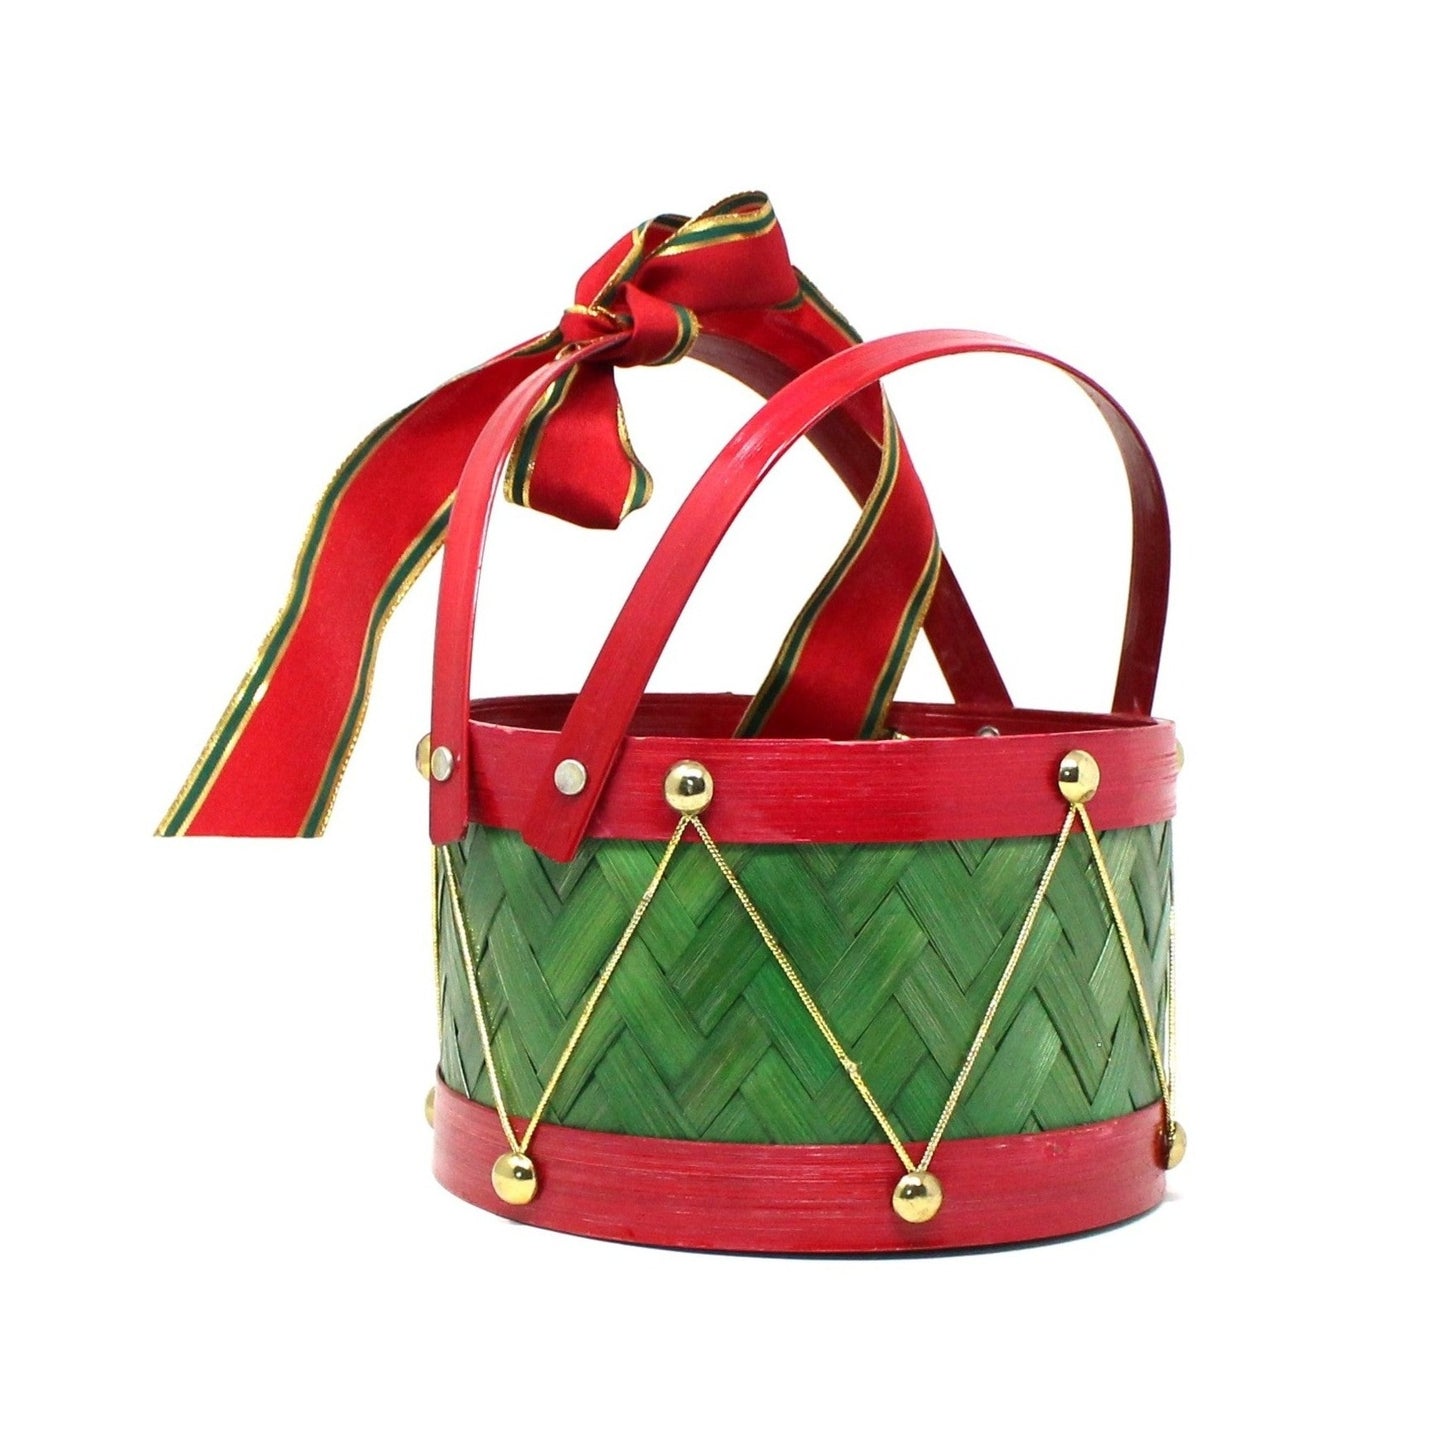 Basket, Red and Green Holiday Drum Shaped Basket with Handles, Vintage 7"